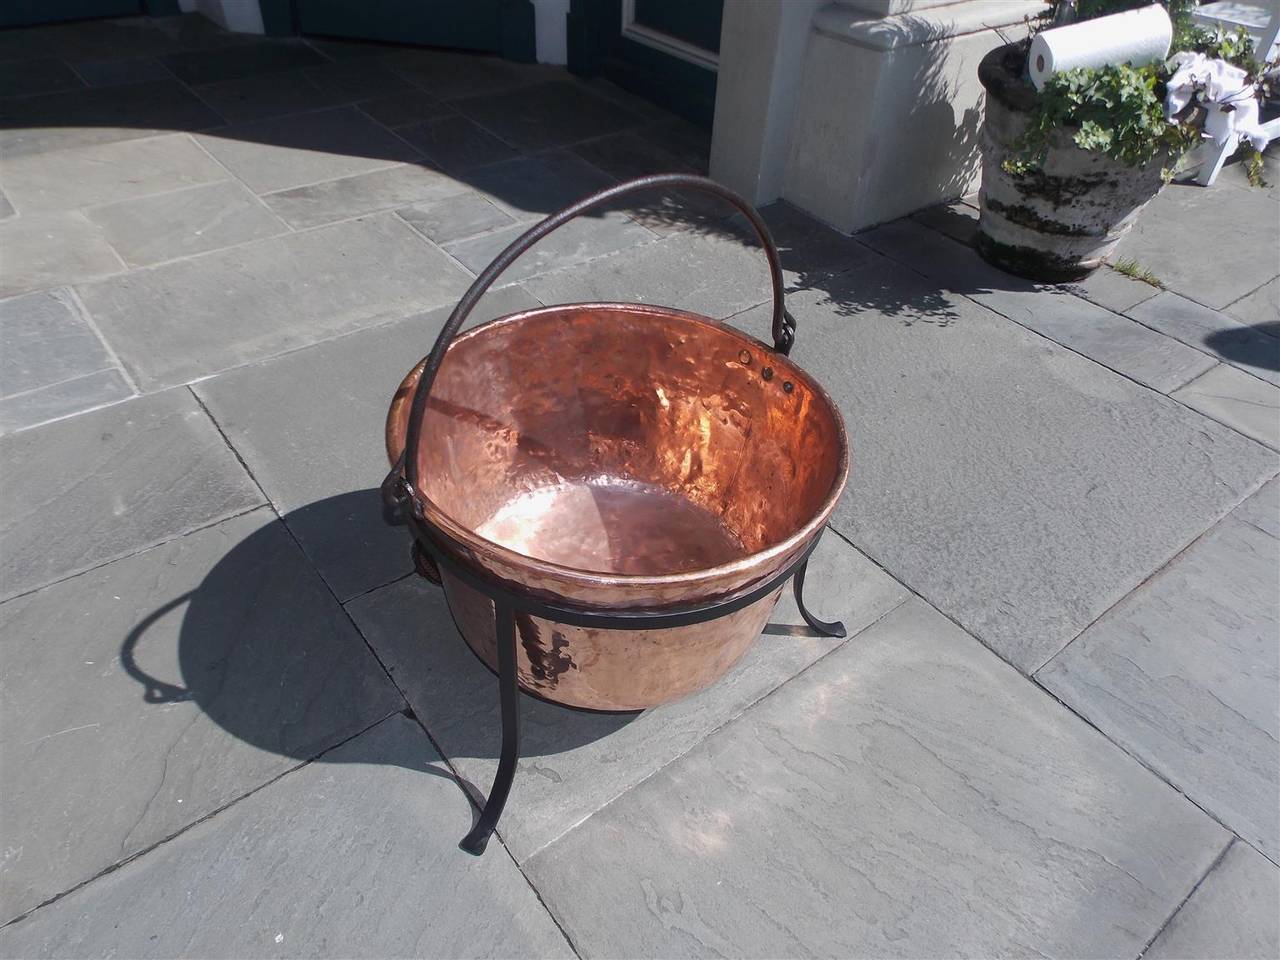 Late 18th Century American Copper and Wrought Iron Plantation Cauldron on Stand, Circa 1780